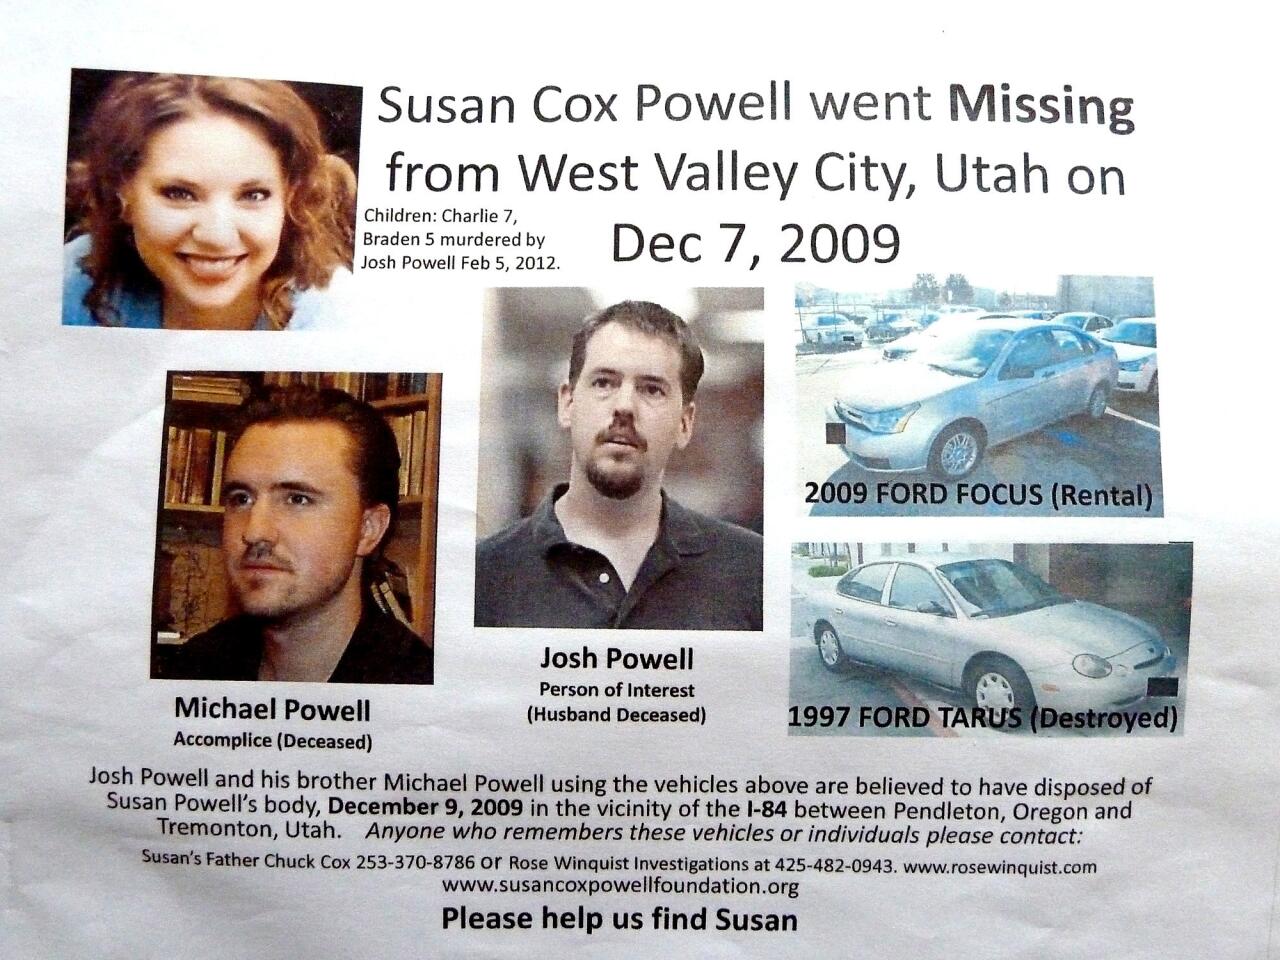 Susan Powell's father still searching for her